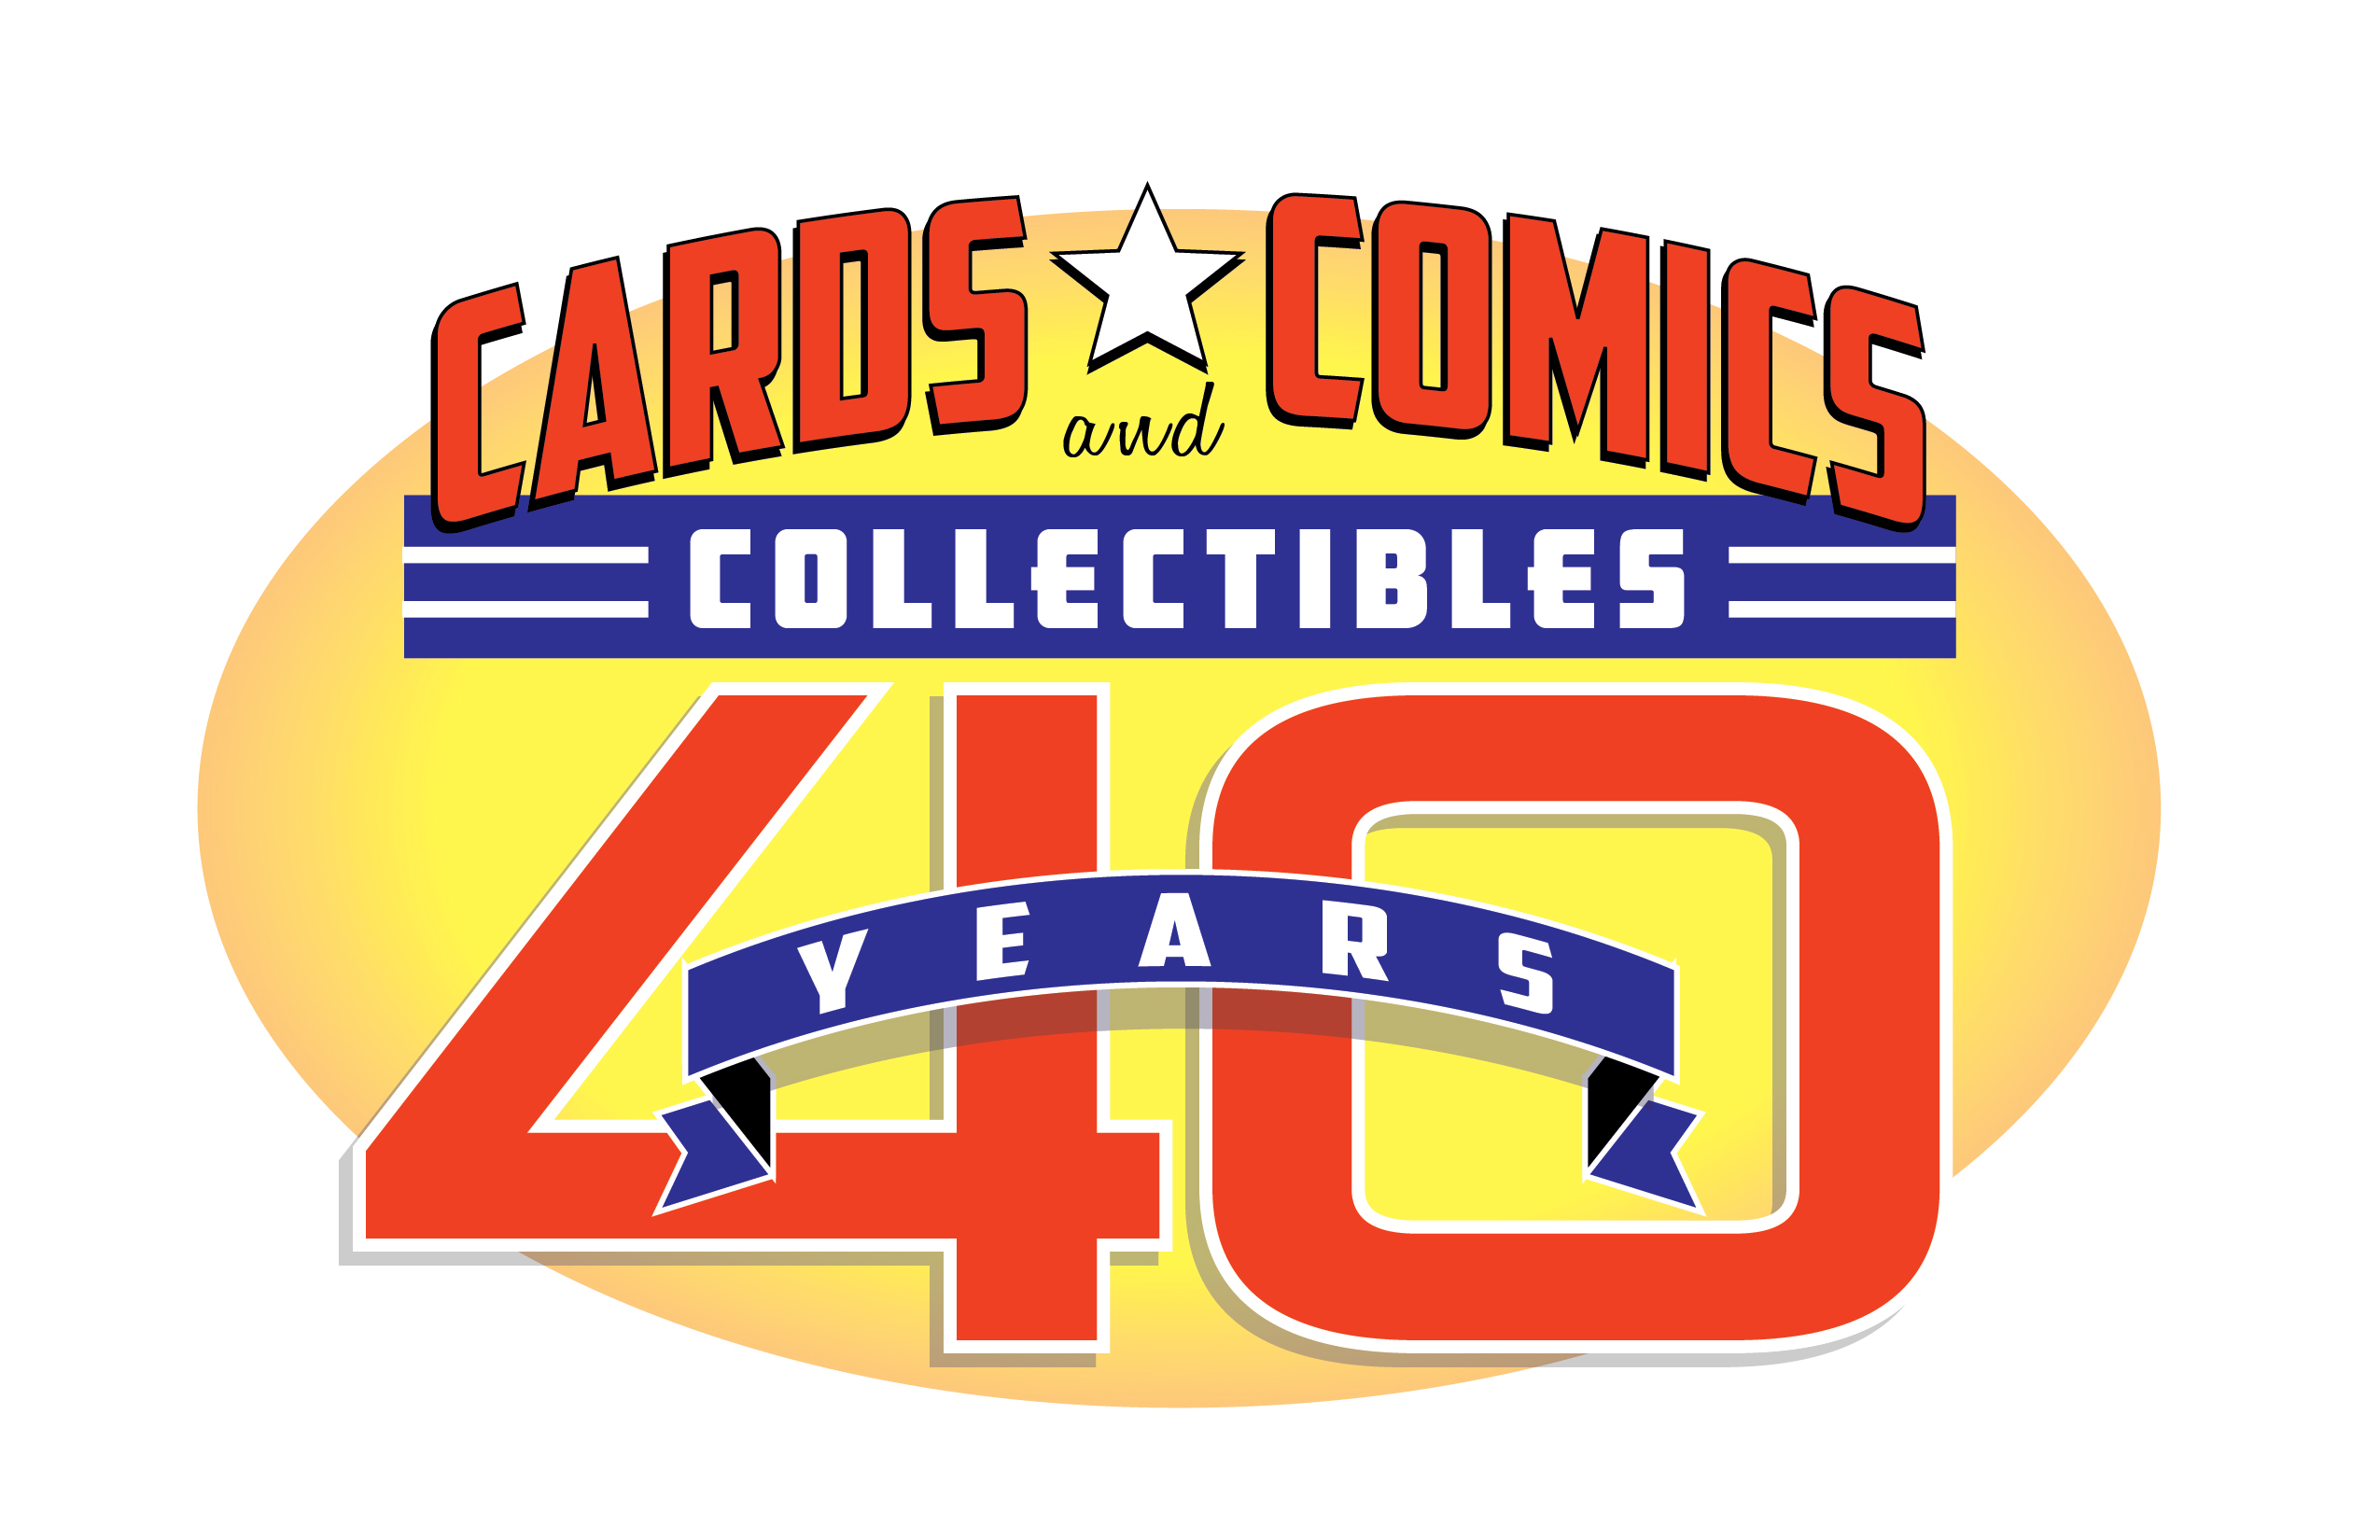 CARDS COMICS AND COLLECTIBLES